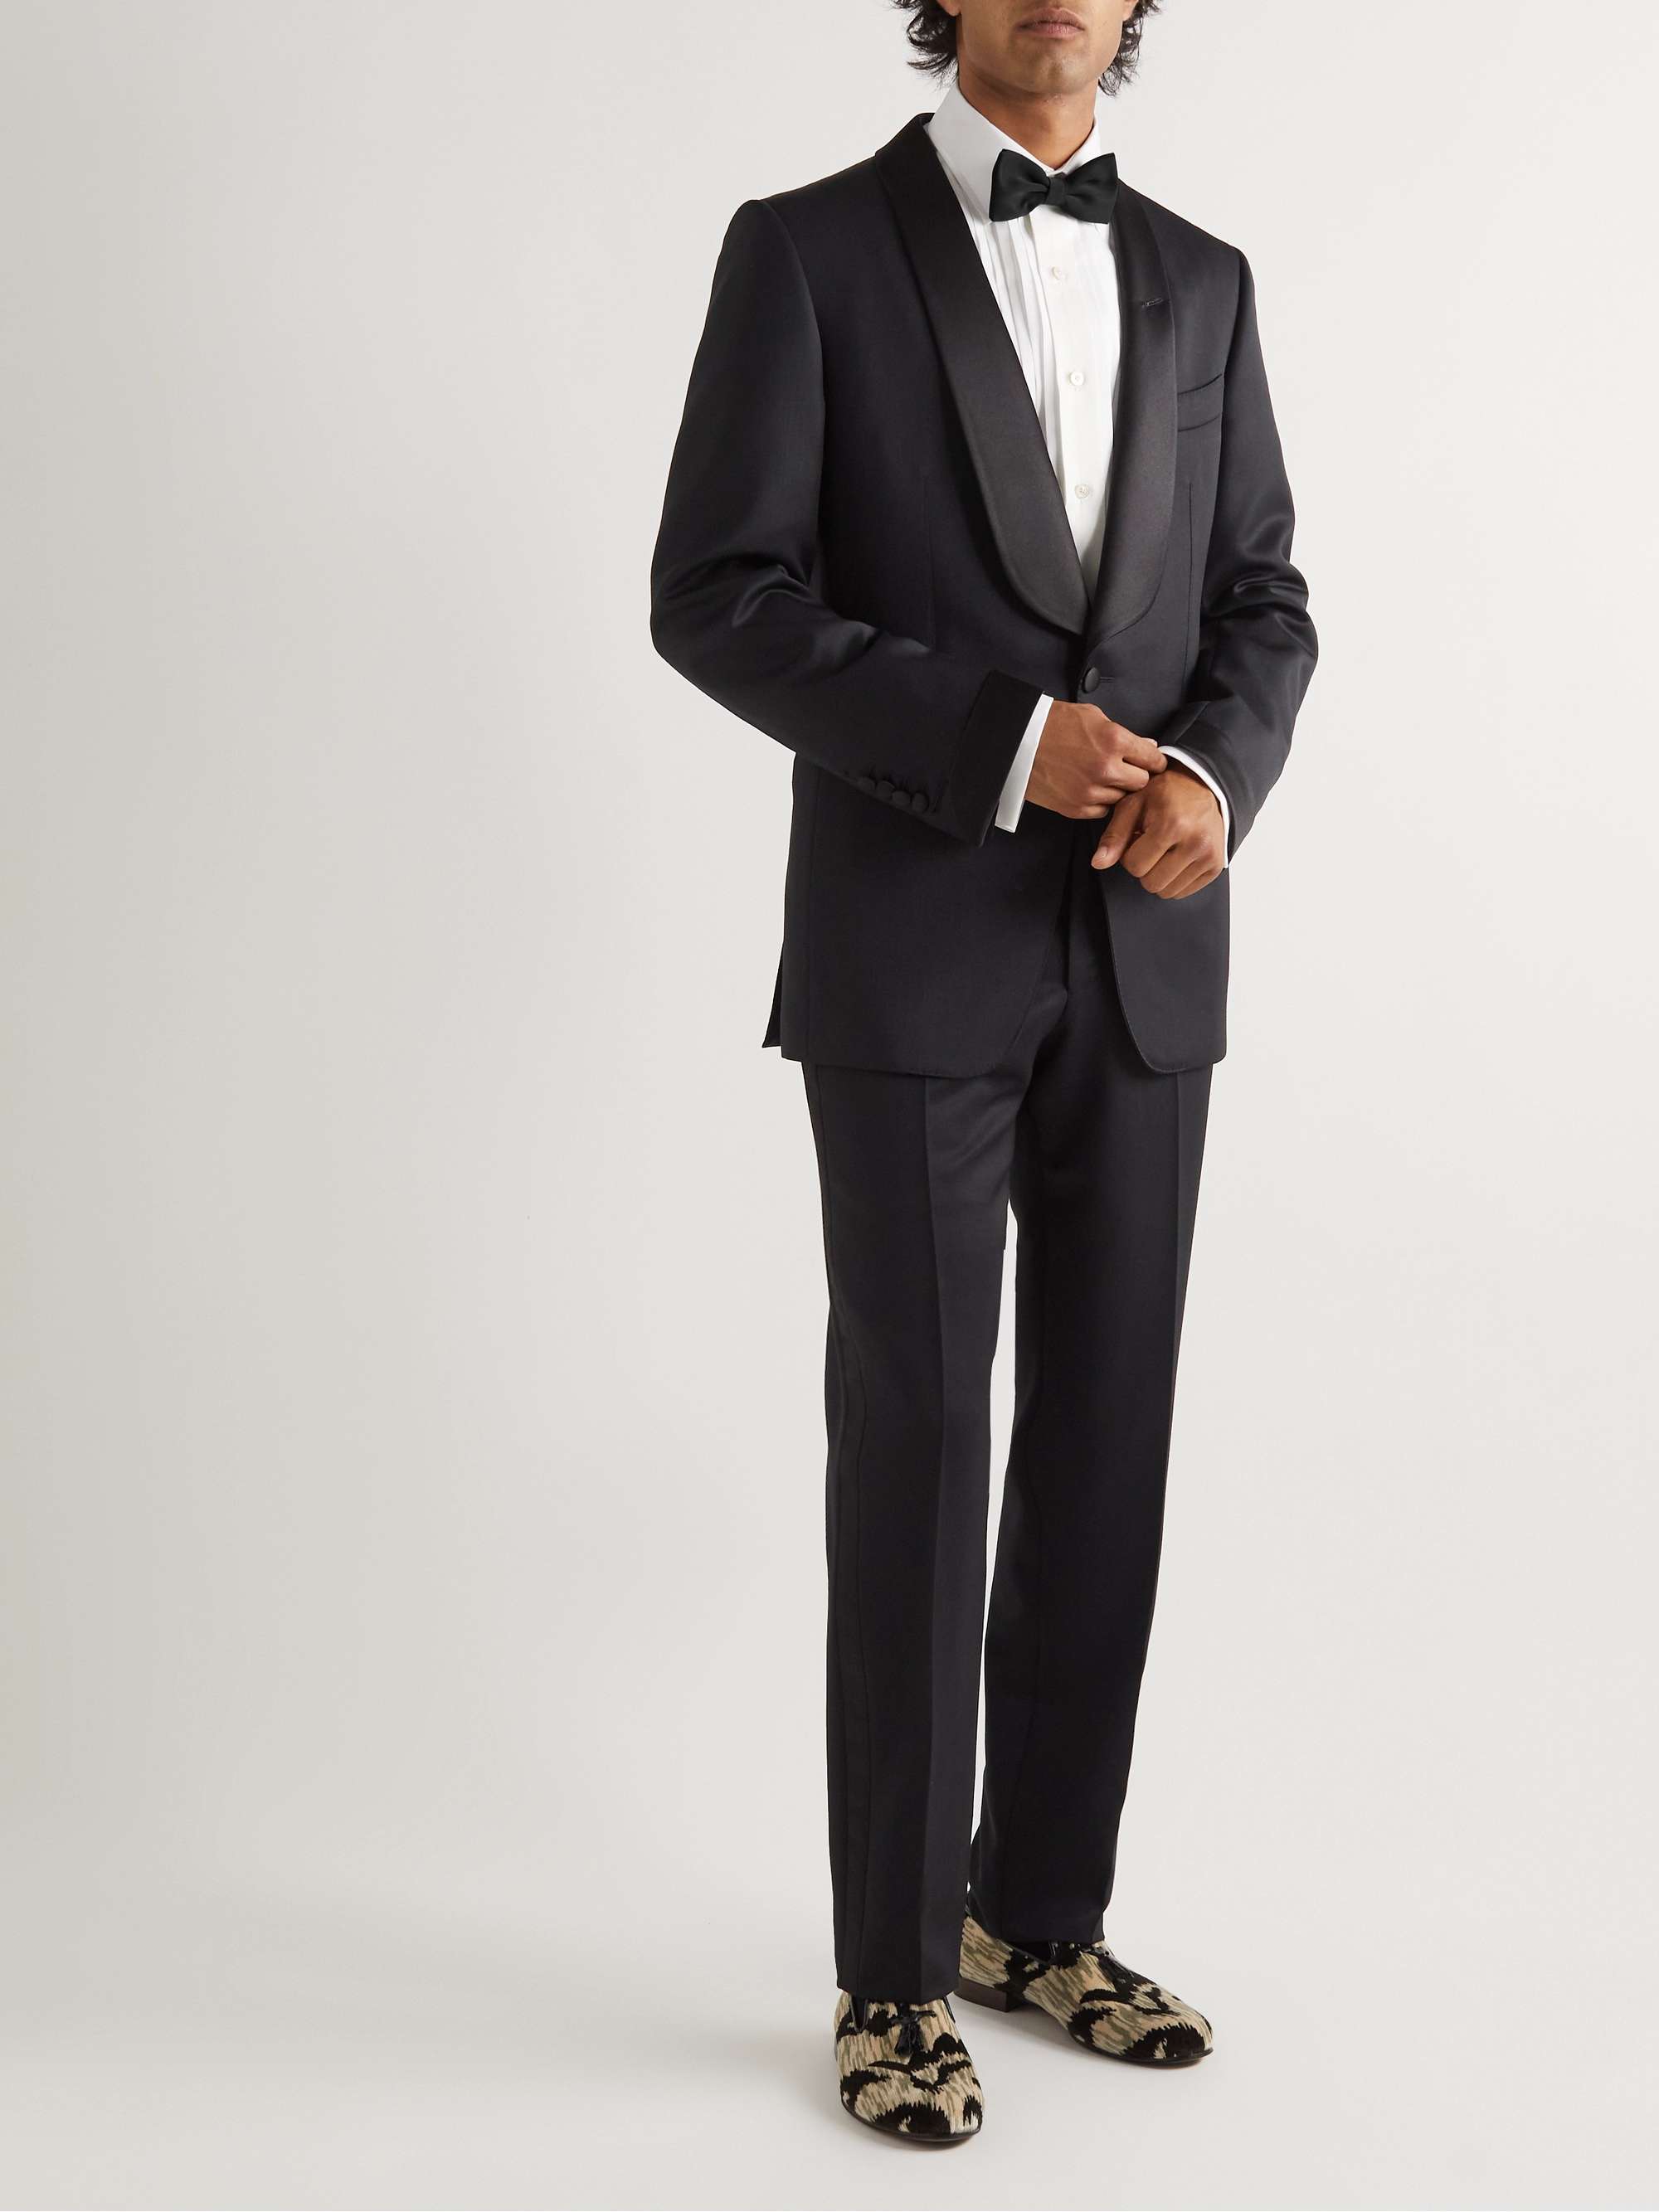 TOM FORD O'Connor Slim-Fit Grain de Poudre Wool and Mohair-Blend Tuxedo ...